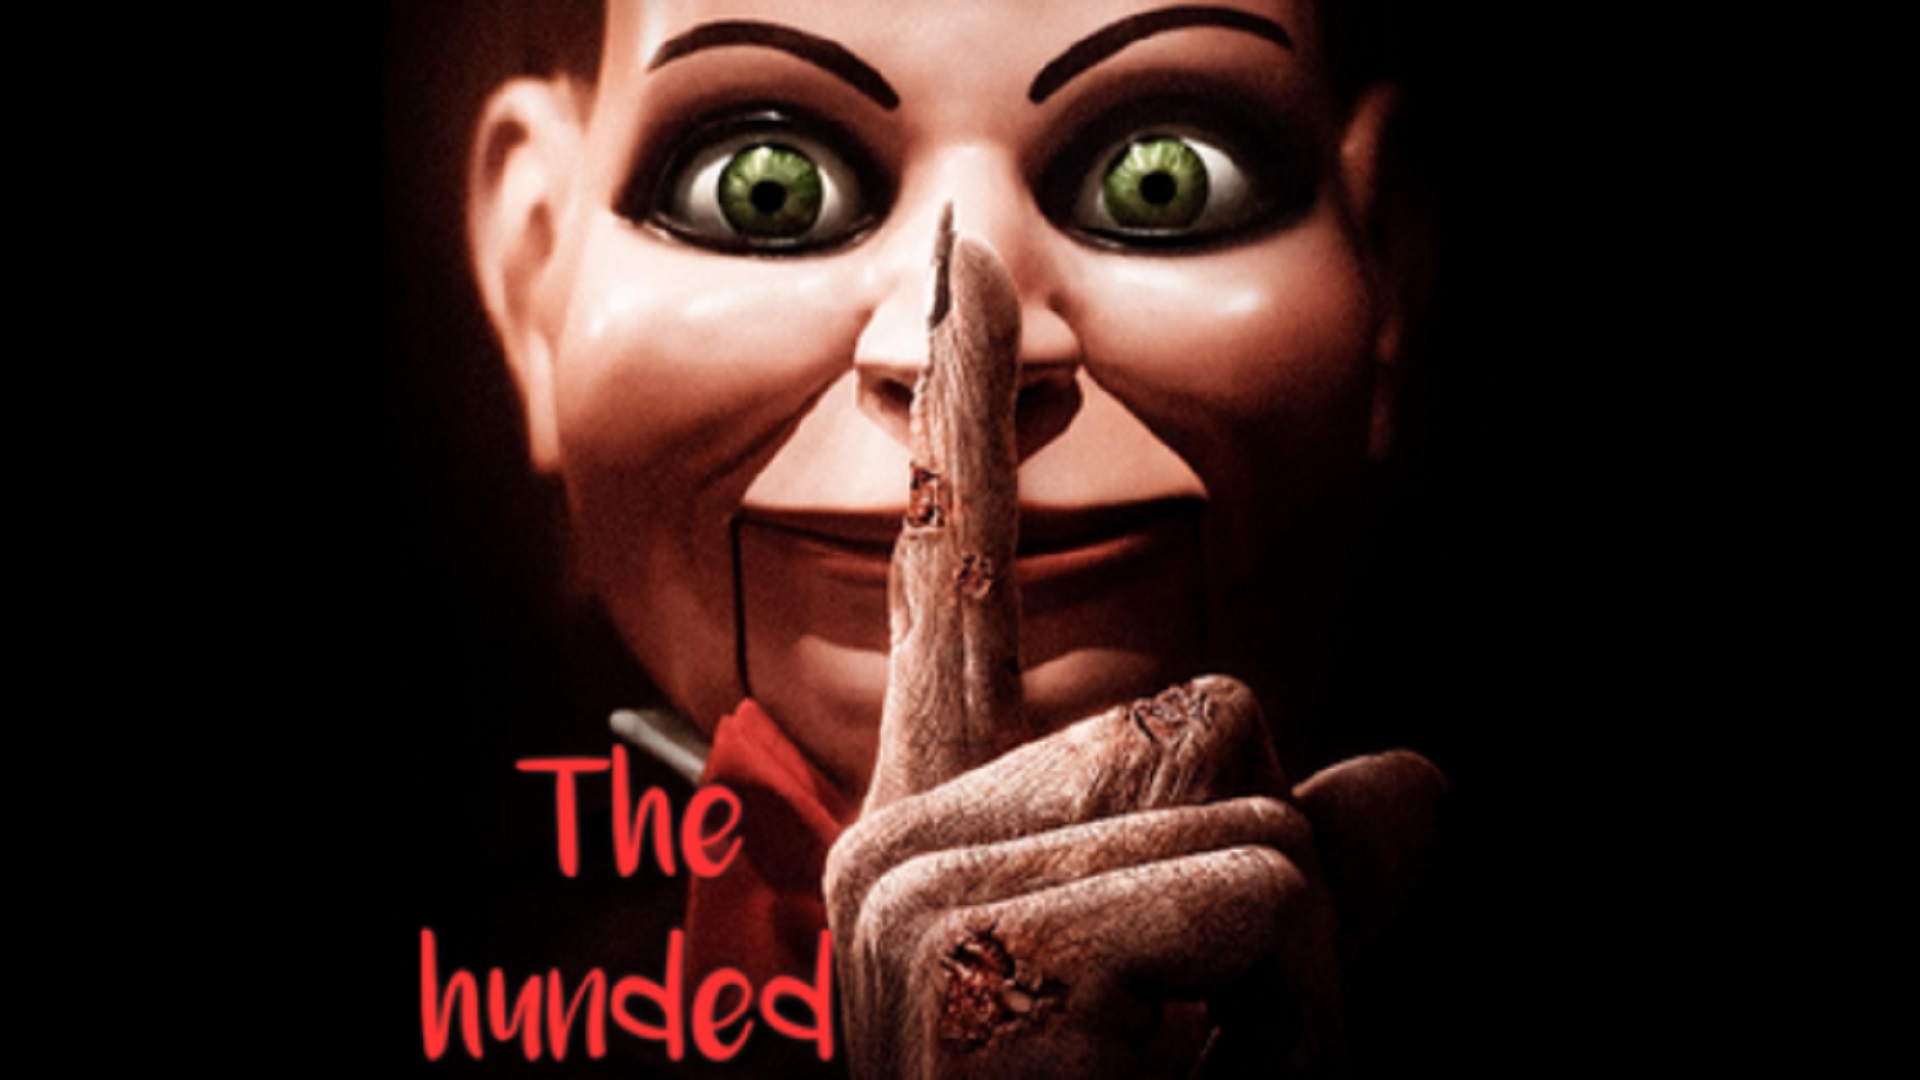 The Hunded